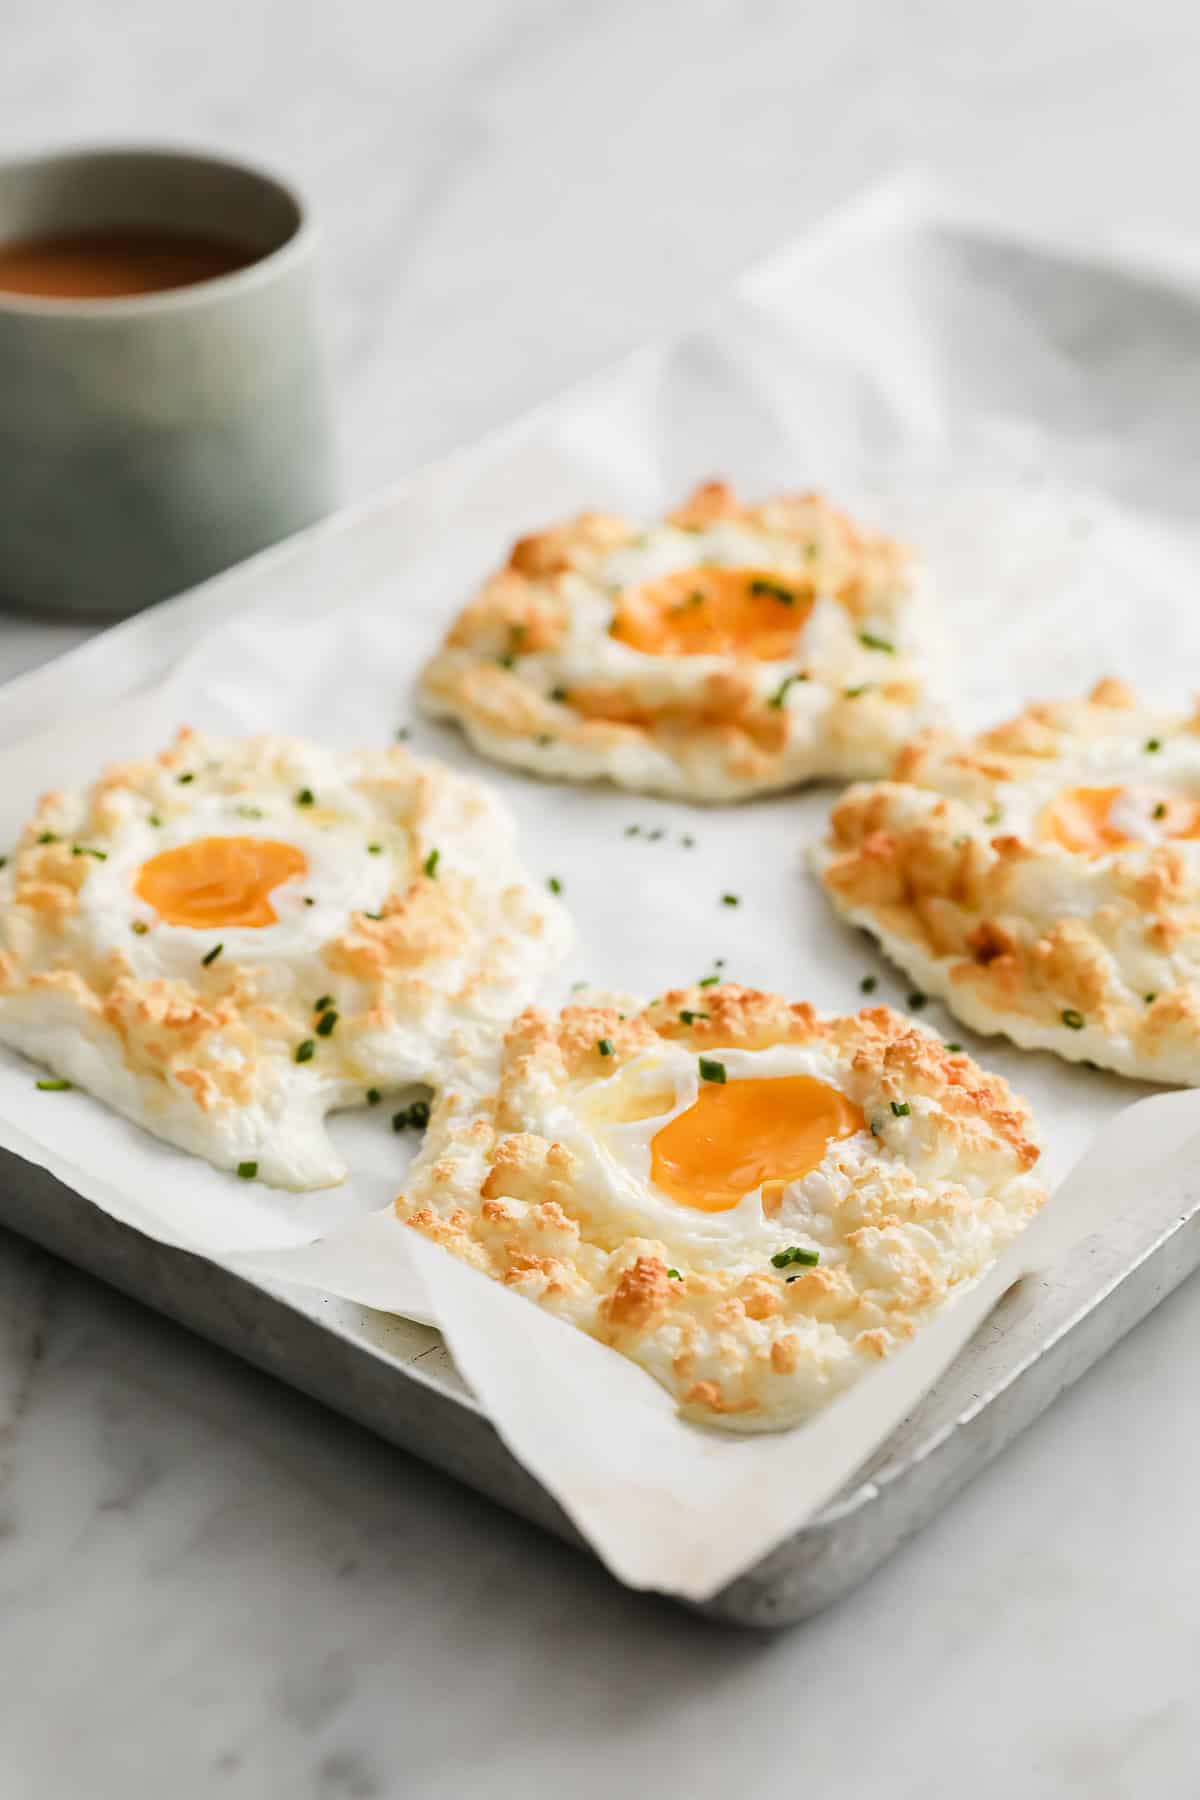 sour cream and chive egg clouds on a baking sheet lined with parchment paper